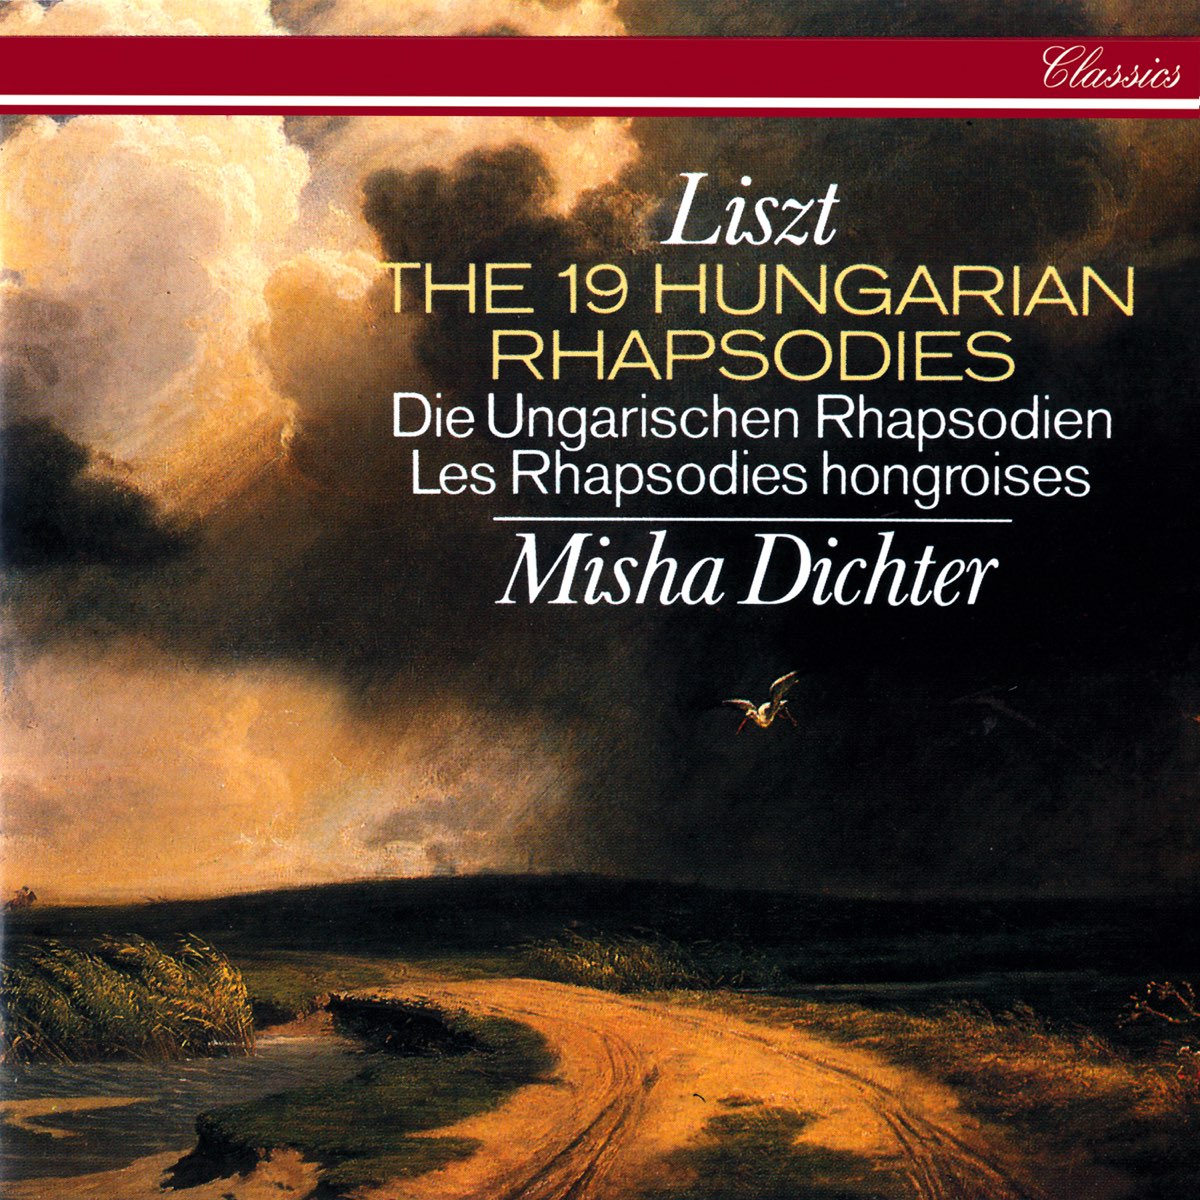 ‎liszt Complete Hungarian Rhapsodies By Misha Dichter On Apple Music 8669